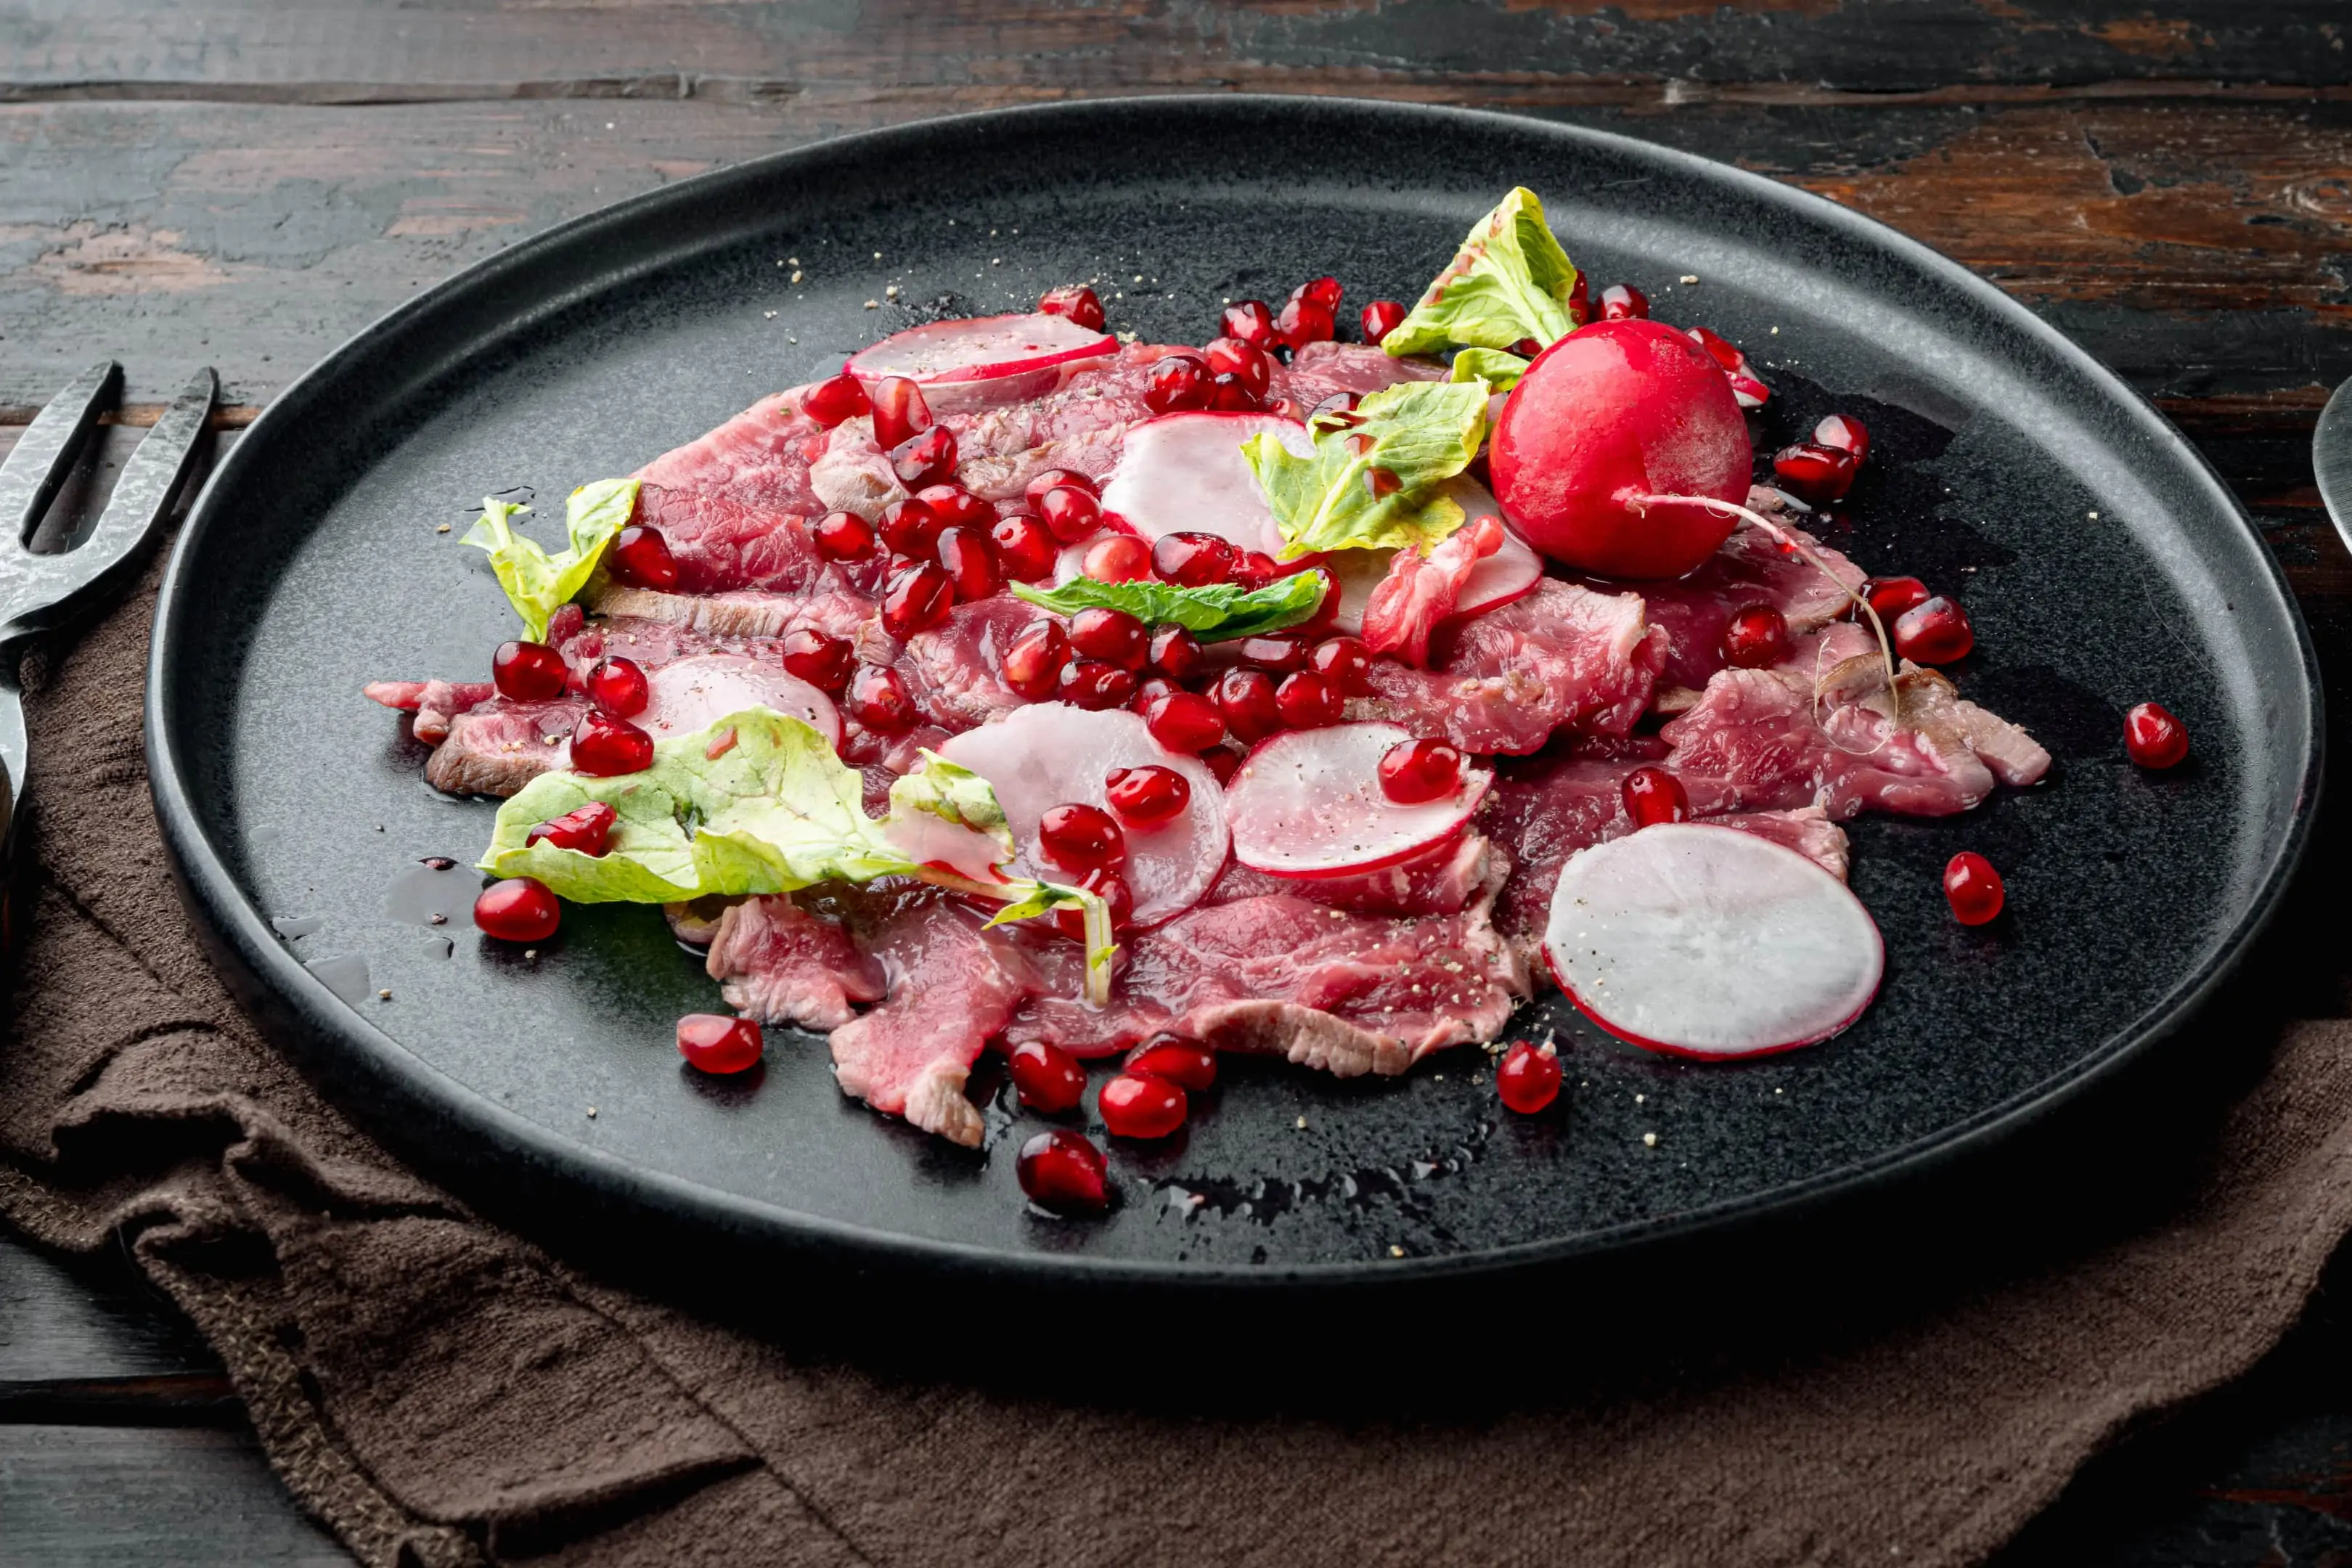 Beef carpaccio with radish, pomegranate seeds and olive oil